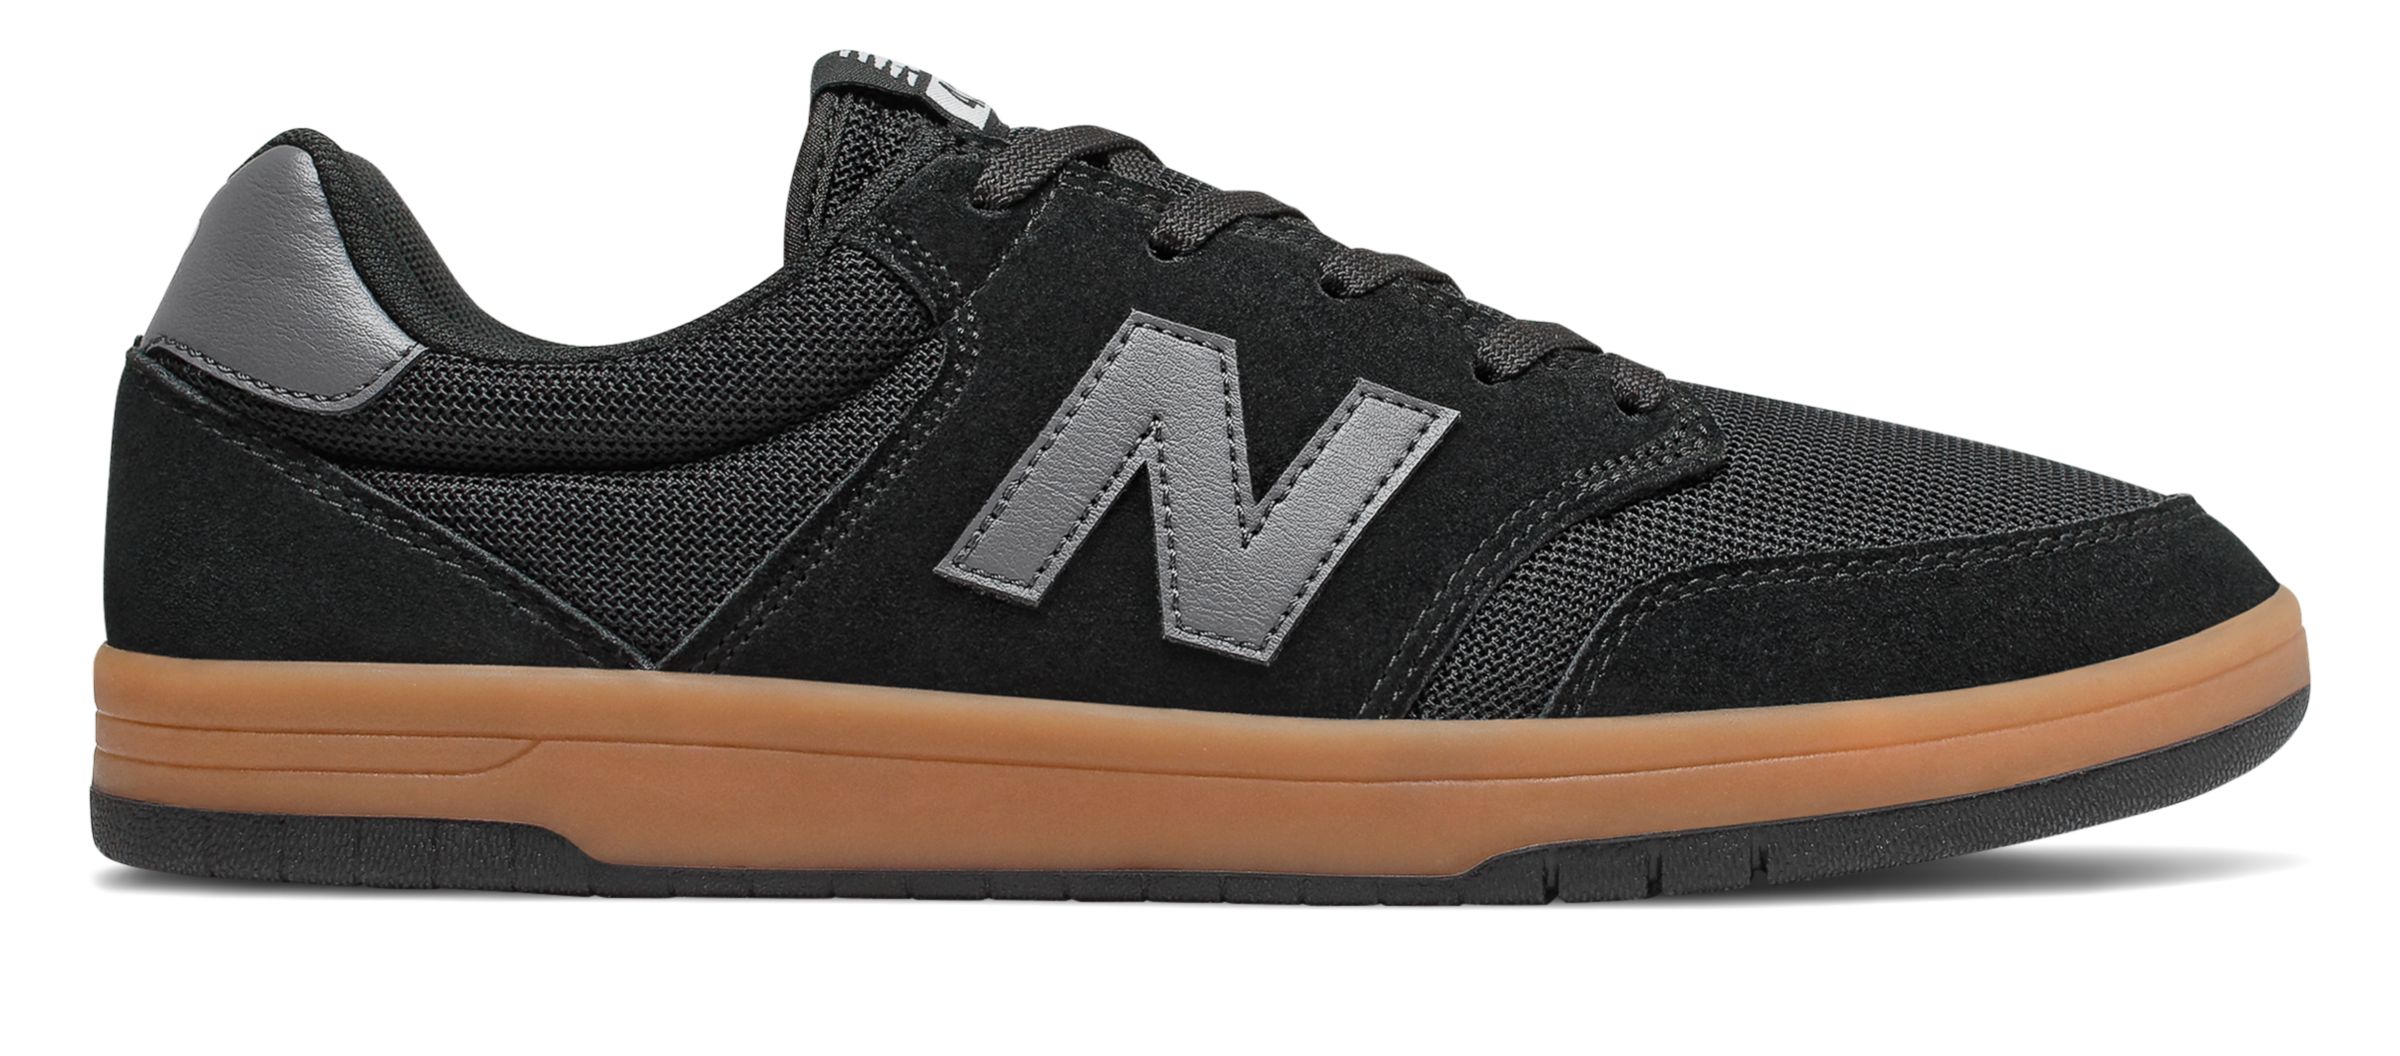 difference between new balance 520 and 620